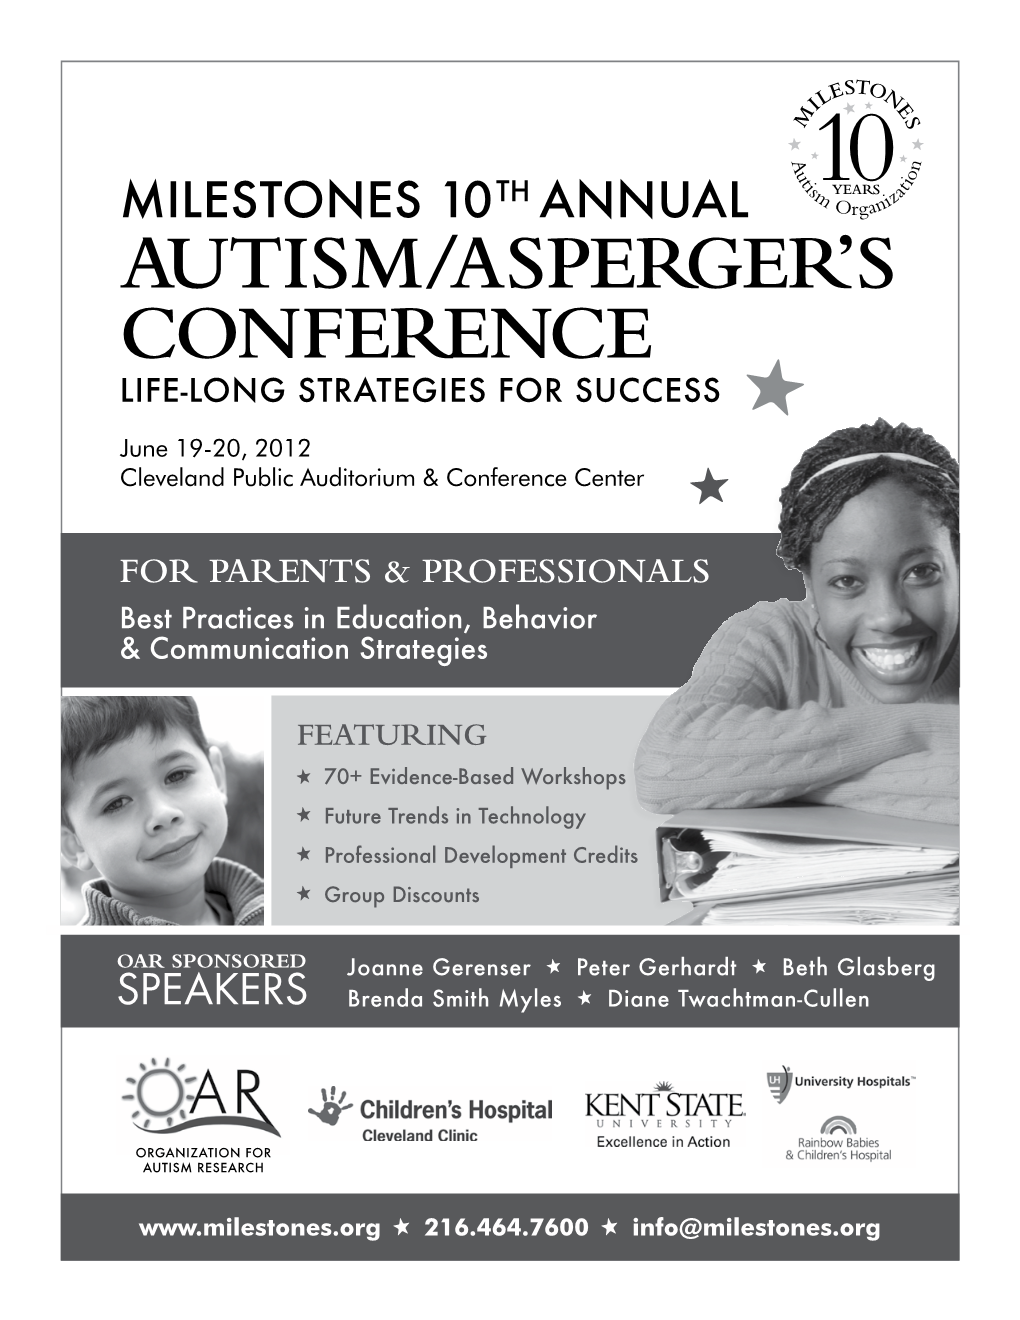 Autism/Asperger's Conferenceconference Conference and Andand